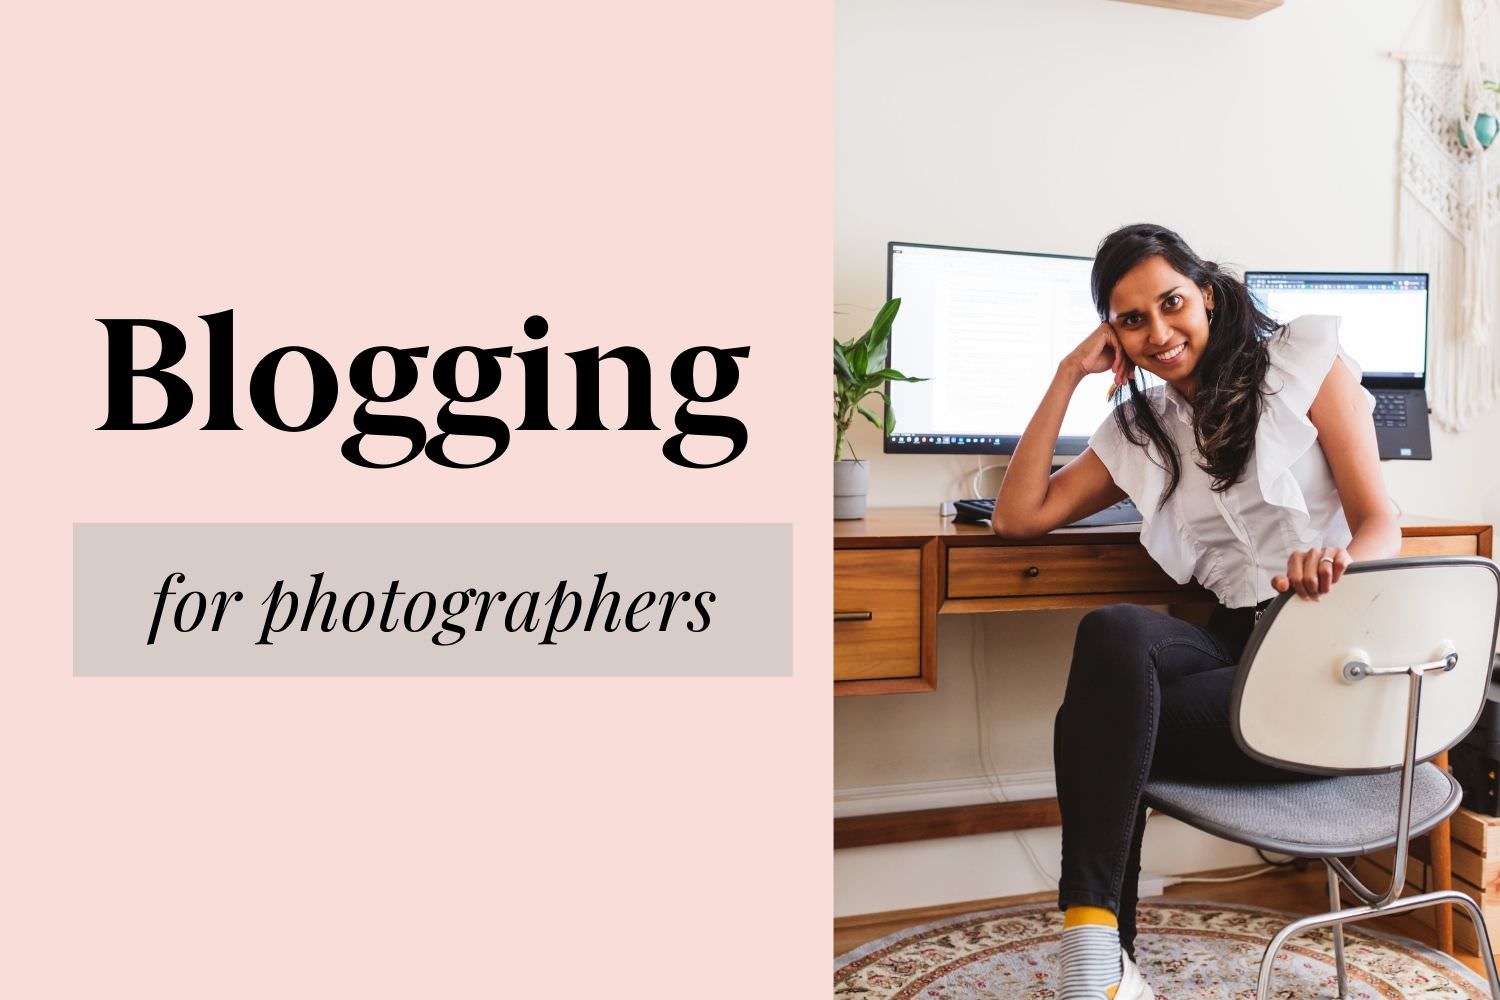 Blogging for photographers - the complete guide for understanding the benefits of blogging for your photography business